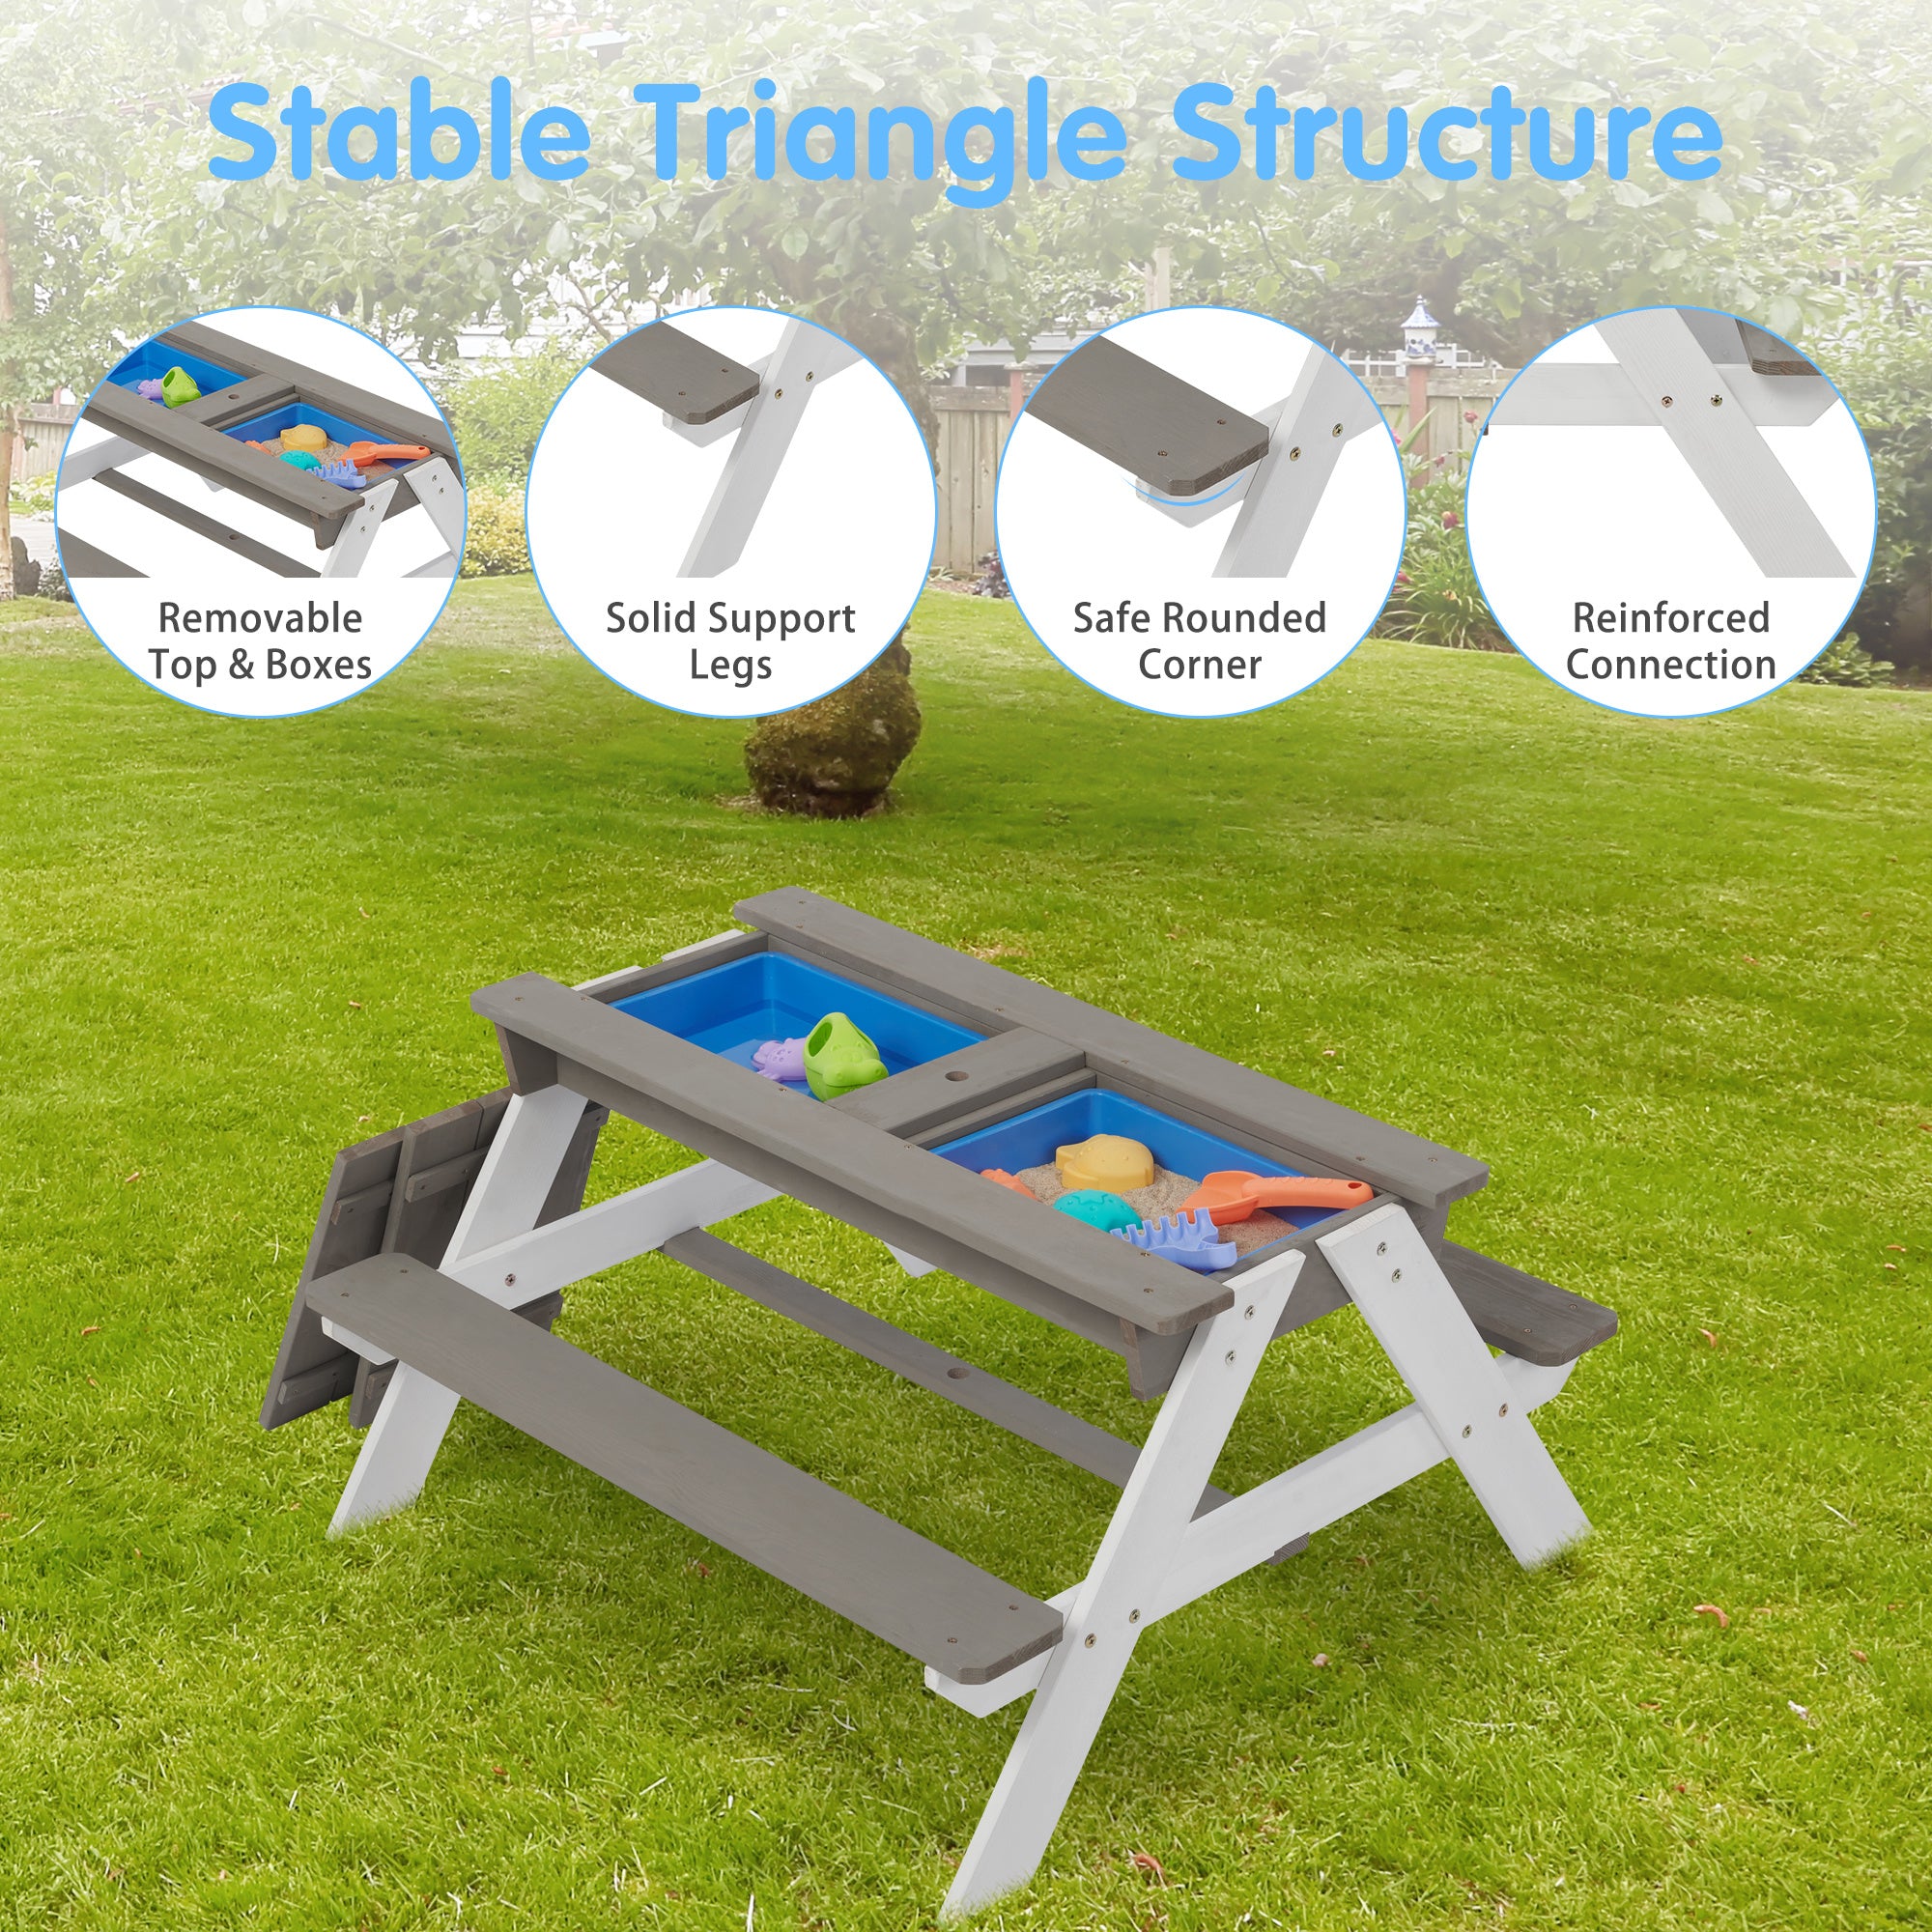 3-in-1 Kids Outdoor Wooden Picnic Table With Umbrella